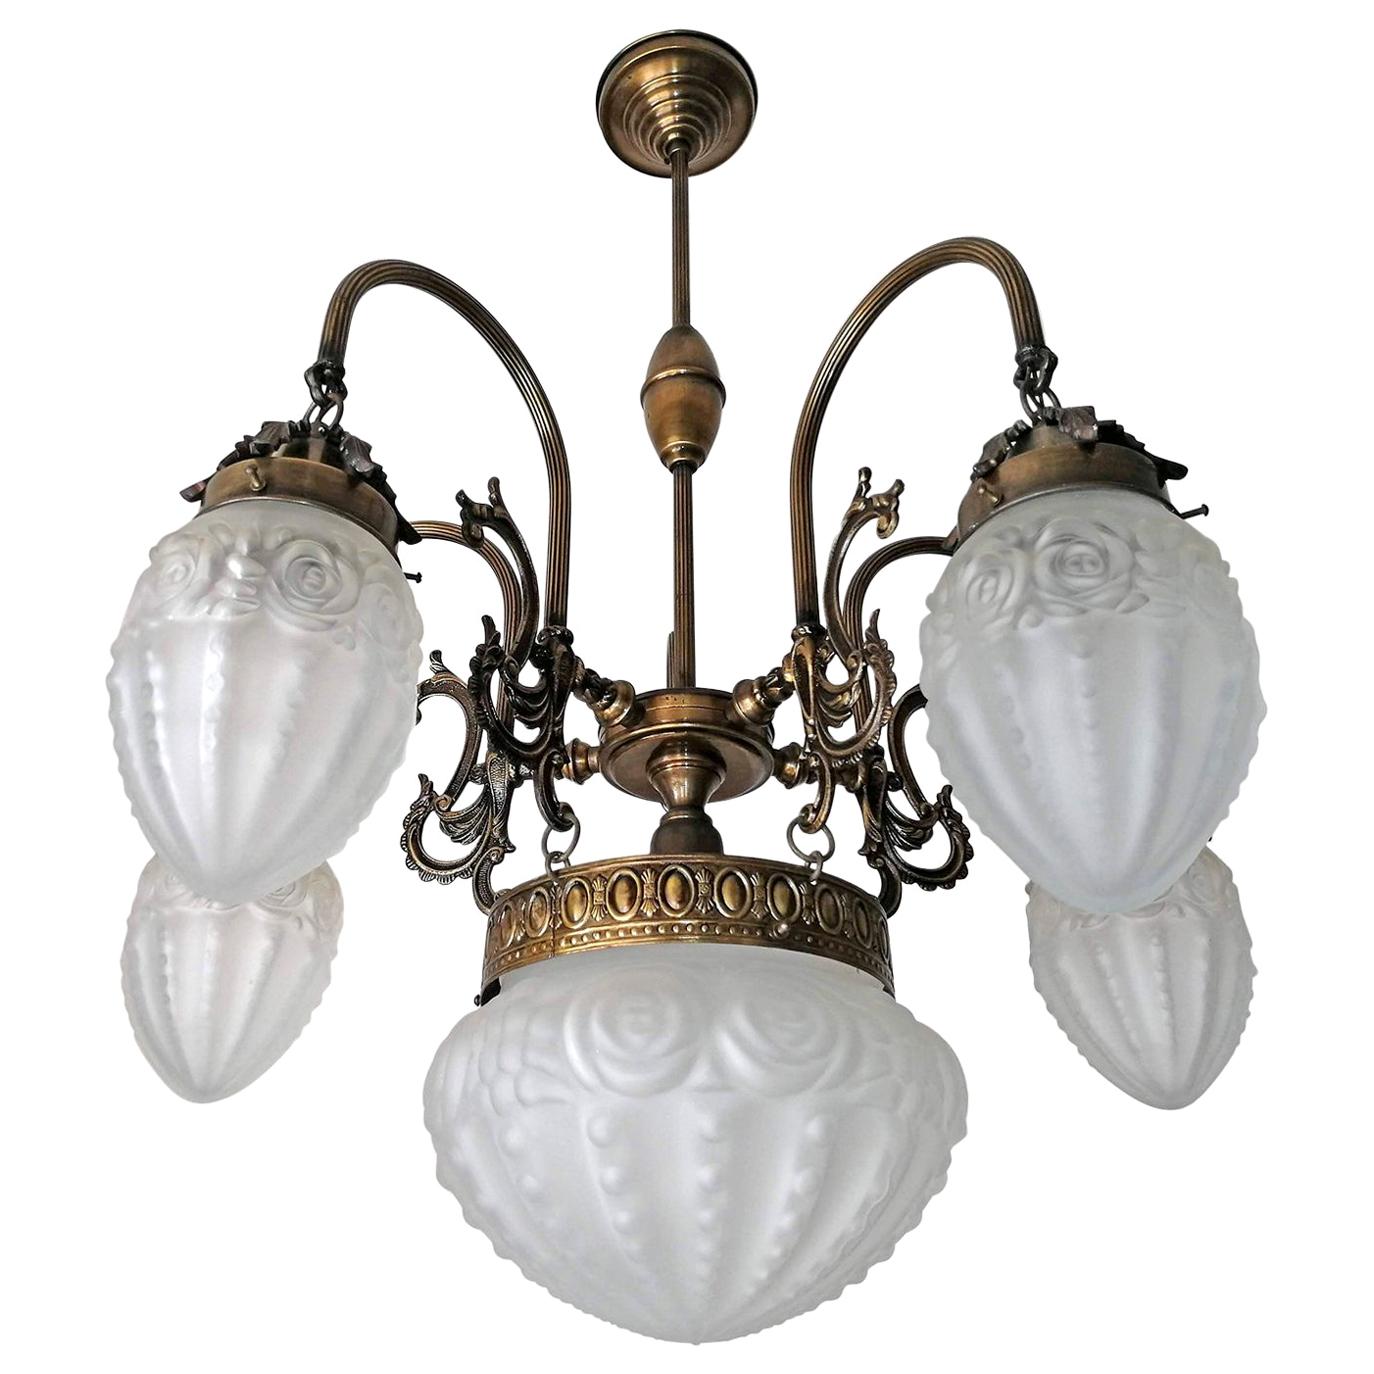 French Degué style Art Deco white frosted glass, 6-light chandelier/ brass bronze color with age patina
6-light bulbs (5 bulbs E14 40W and one bulb E27 60W)
Good working condition
Measures:
Diameter 27 in / 68 cm
Height 35 in / 88 cm
Glass shades 5